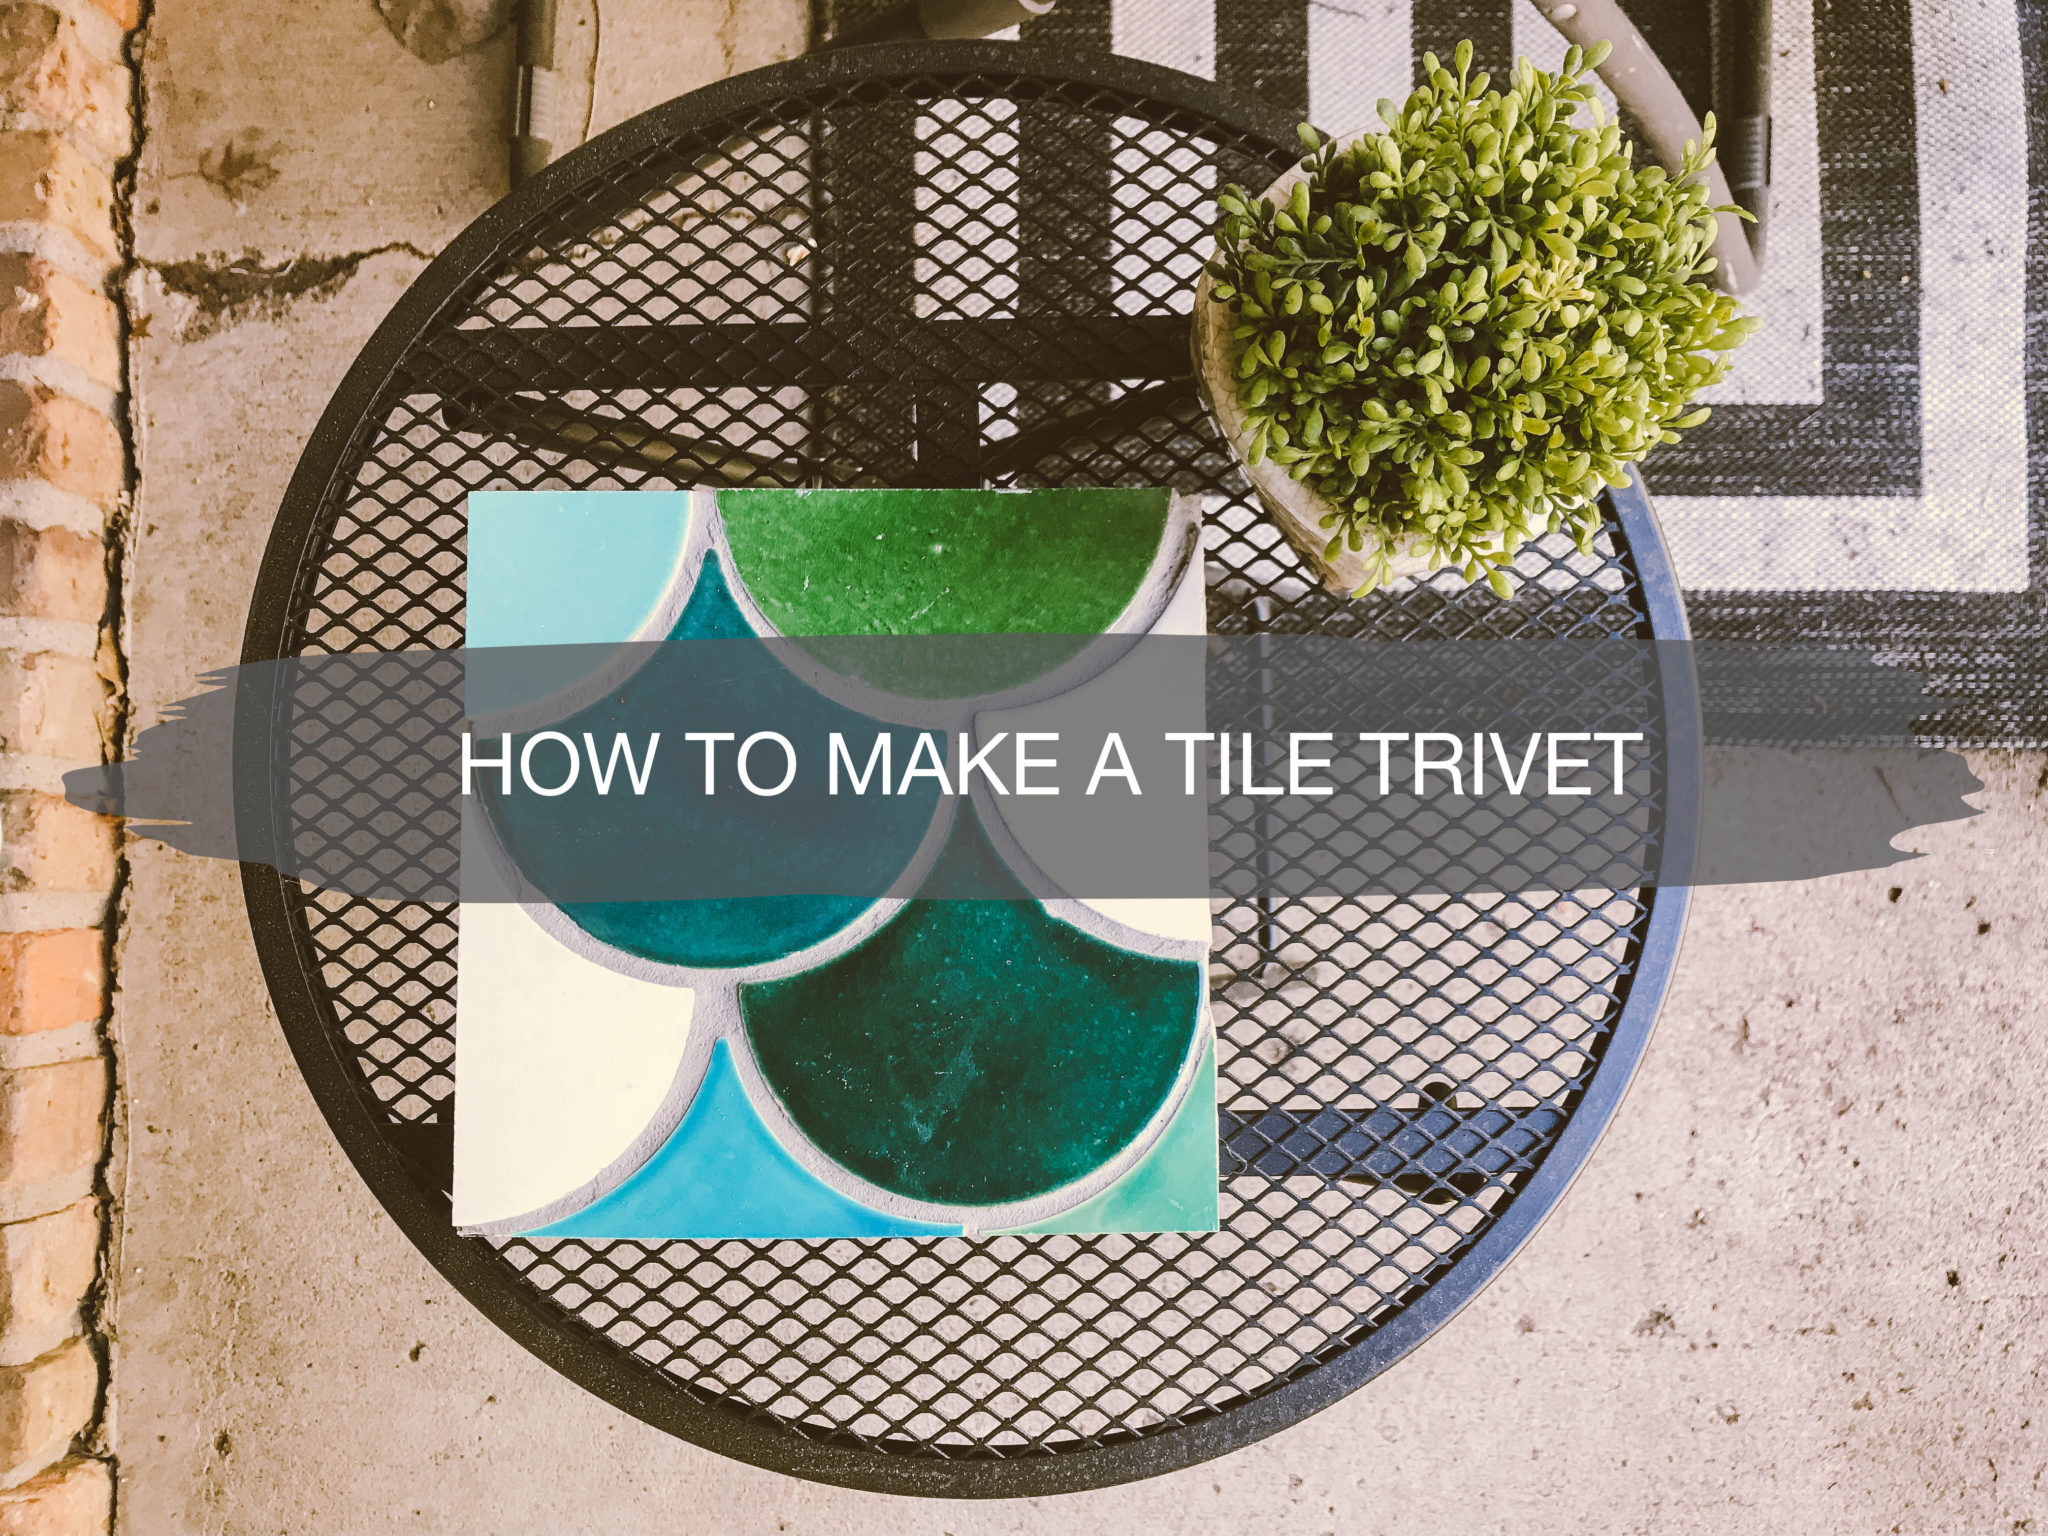 How to Make a Tile Trivet | construction2style